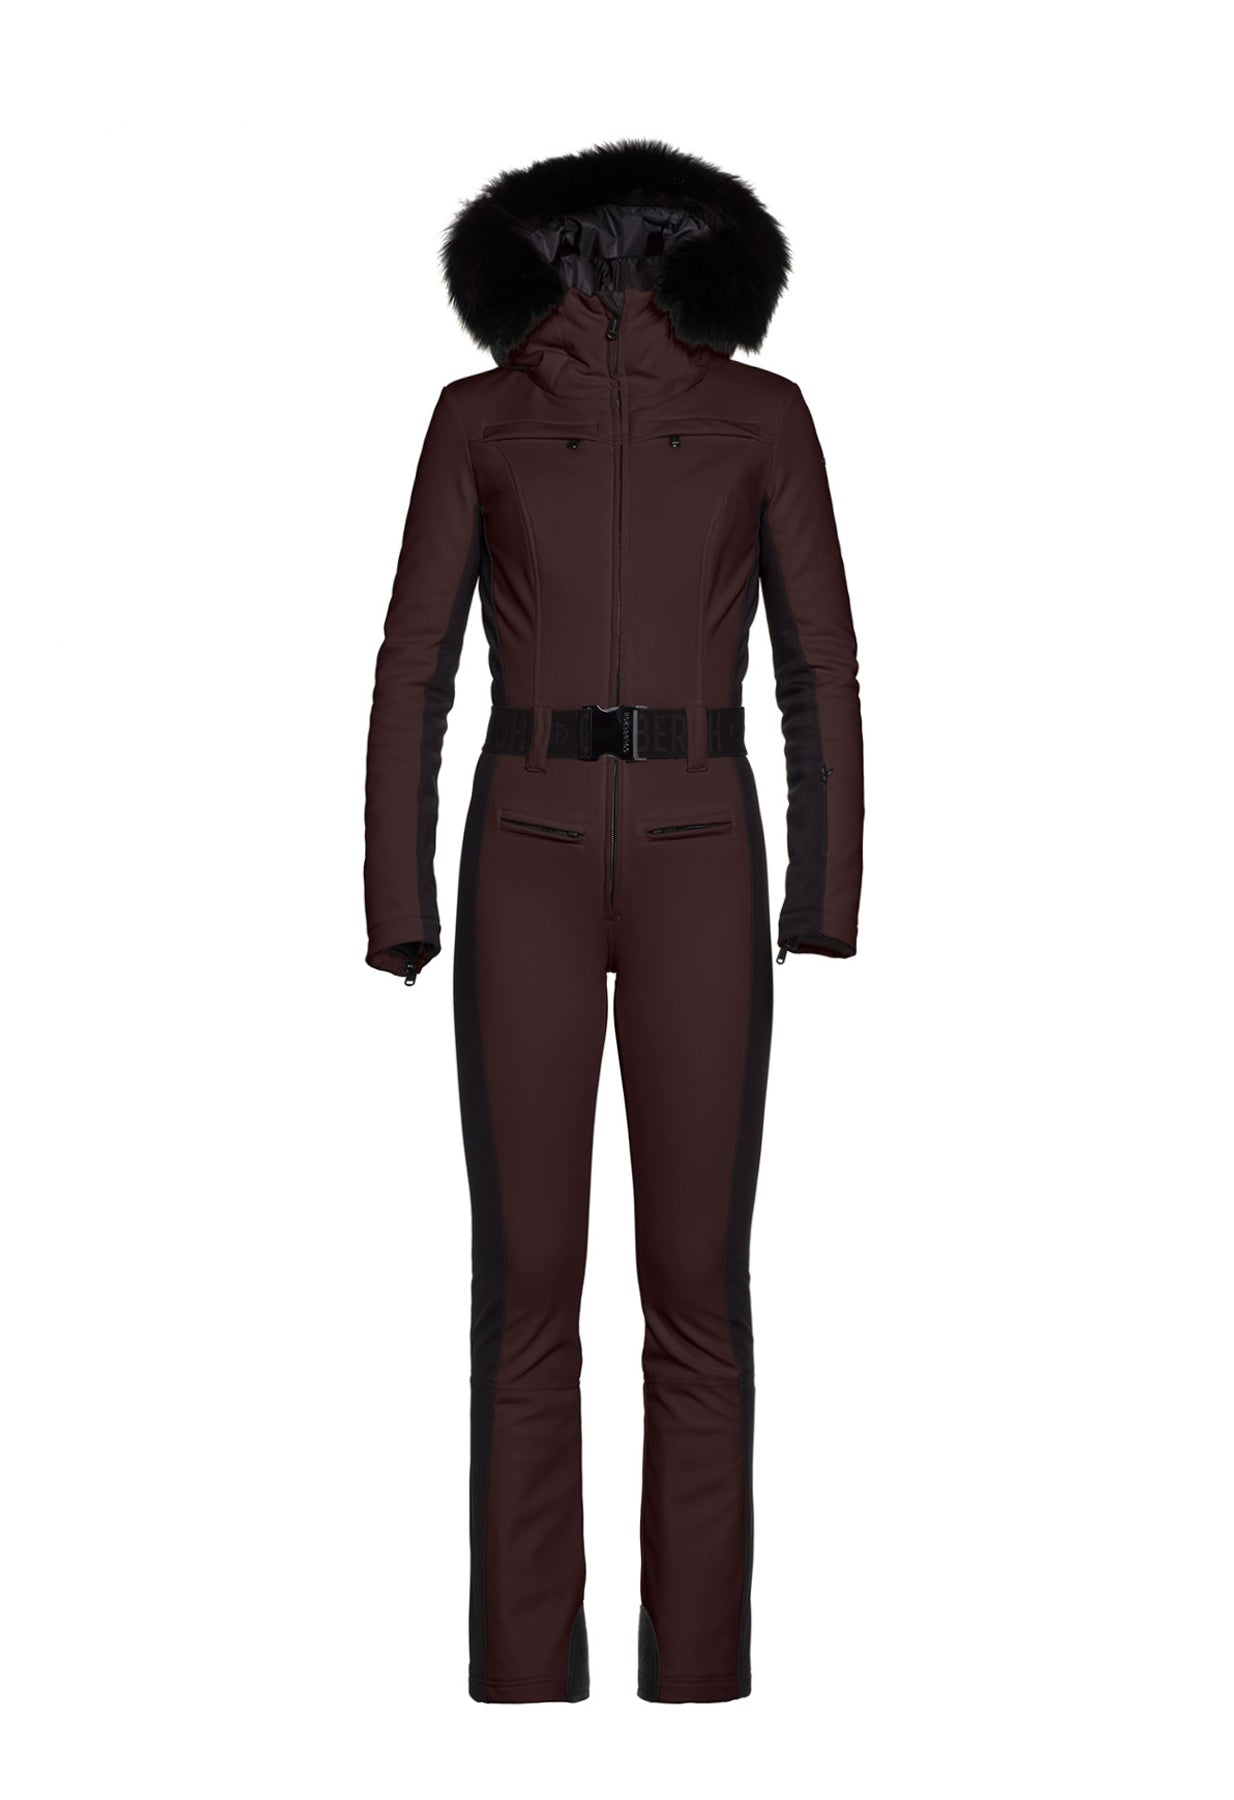 Goldbergh Parry One Piece Ski Suit in Brown with Faux Fur Hood